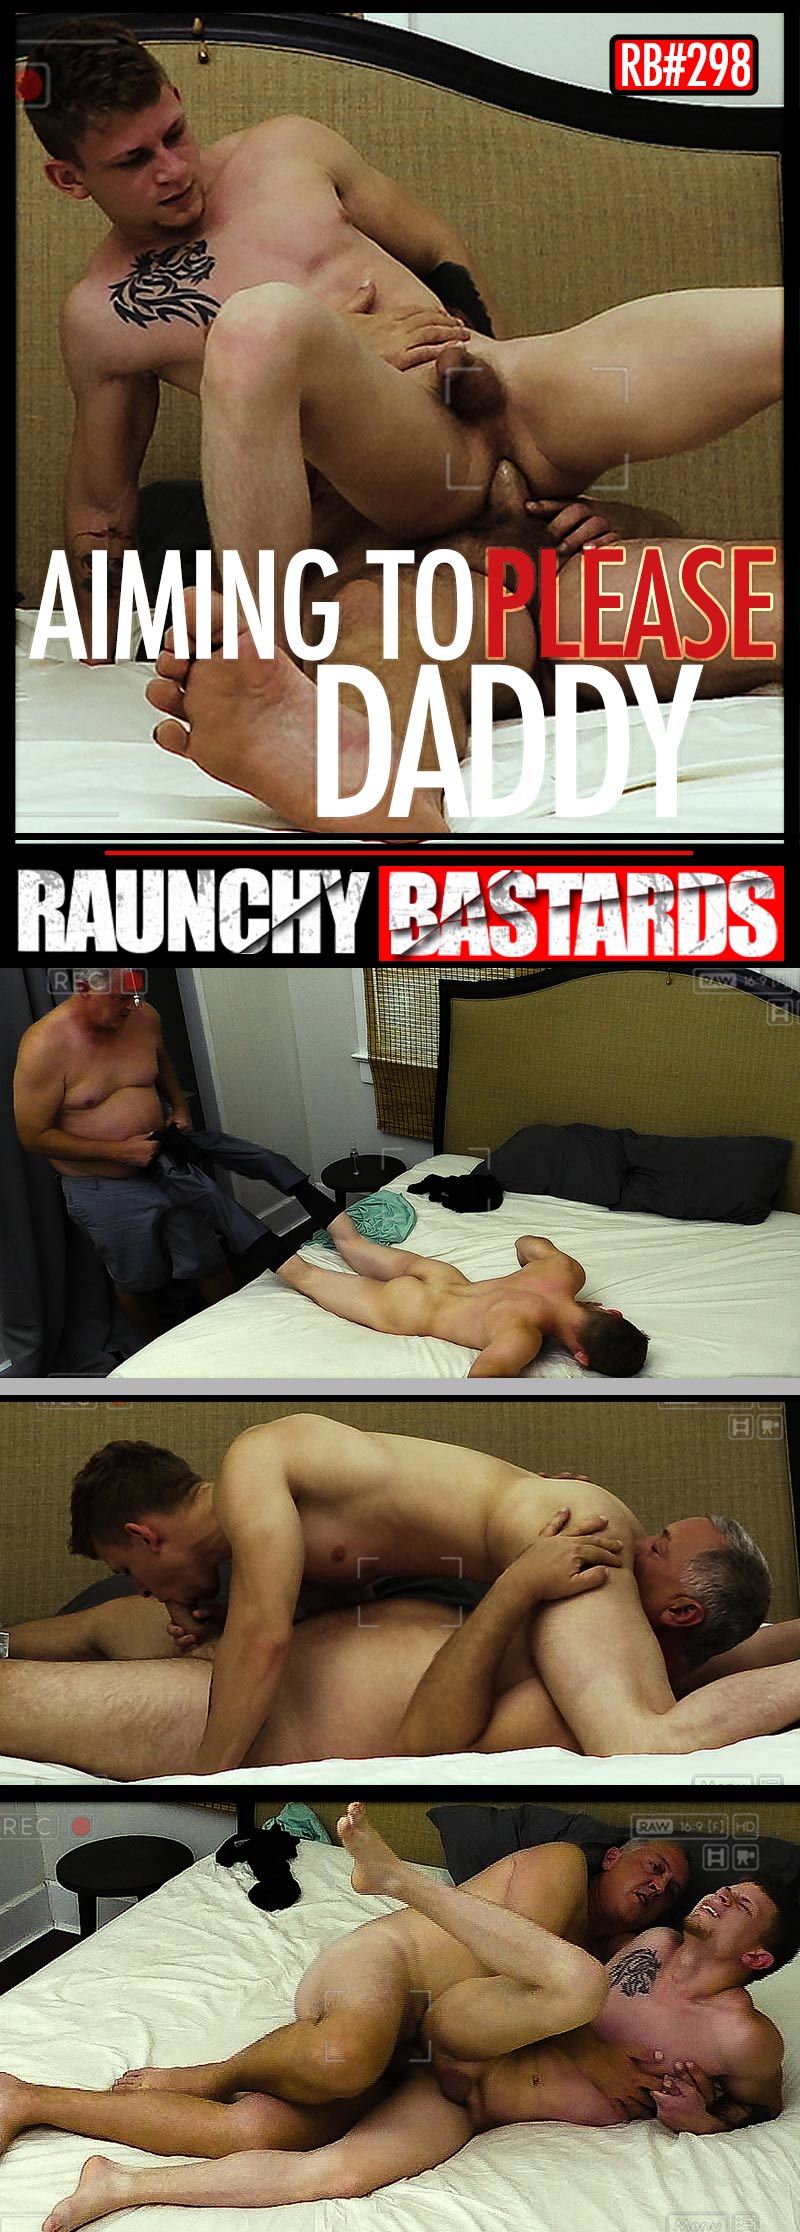 Clay Fucks Matt Moss in 'Aiming To Please Daddy' at Raunch Bastards